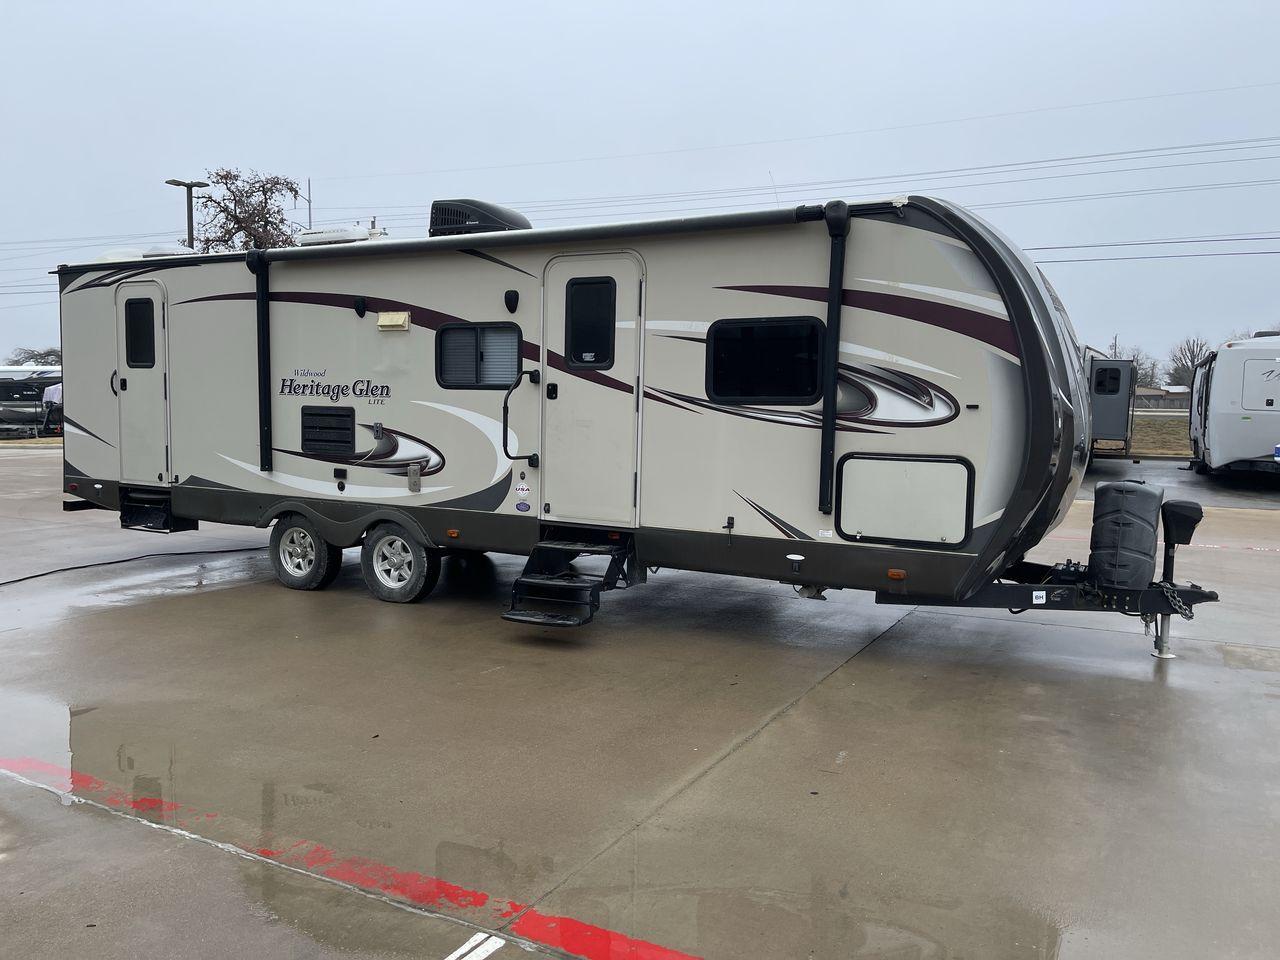 2015 TAN FOREST RIVER HERITAGE GLEN 272BH (4X4TWBC28FU) , Length: 32.25 ft. | Dry Weight: 6,285 lbs. | Gross Weight: 9,450 lbs. | Slides: 1 transmission, located at 4319 N Main St, Cleburne, TX, 76033, (817) 678-5133, 32.385960, -97.391212 - The 2015 Forest River Heritage Glen 272BH CT is a travel trailer designed to combine comfort, innovation, and family-friendly features for memorable camping experiences. It is a well-balanced and efficiently designed travel trailer, measuring approximately 32.25 feet in length and boasting a dry wei - Photo #23